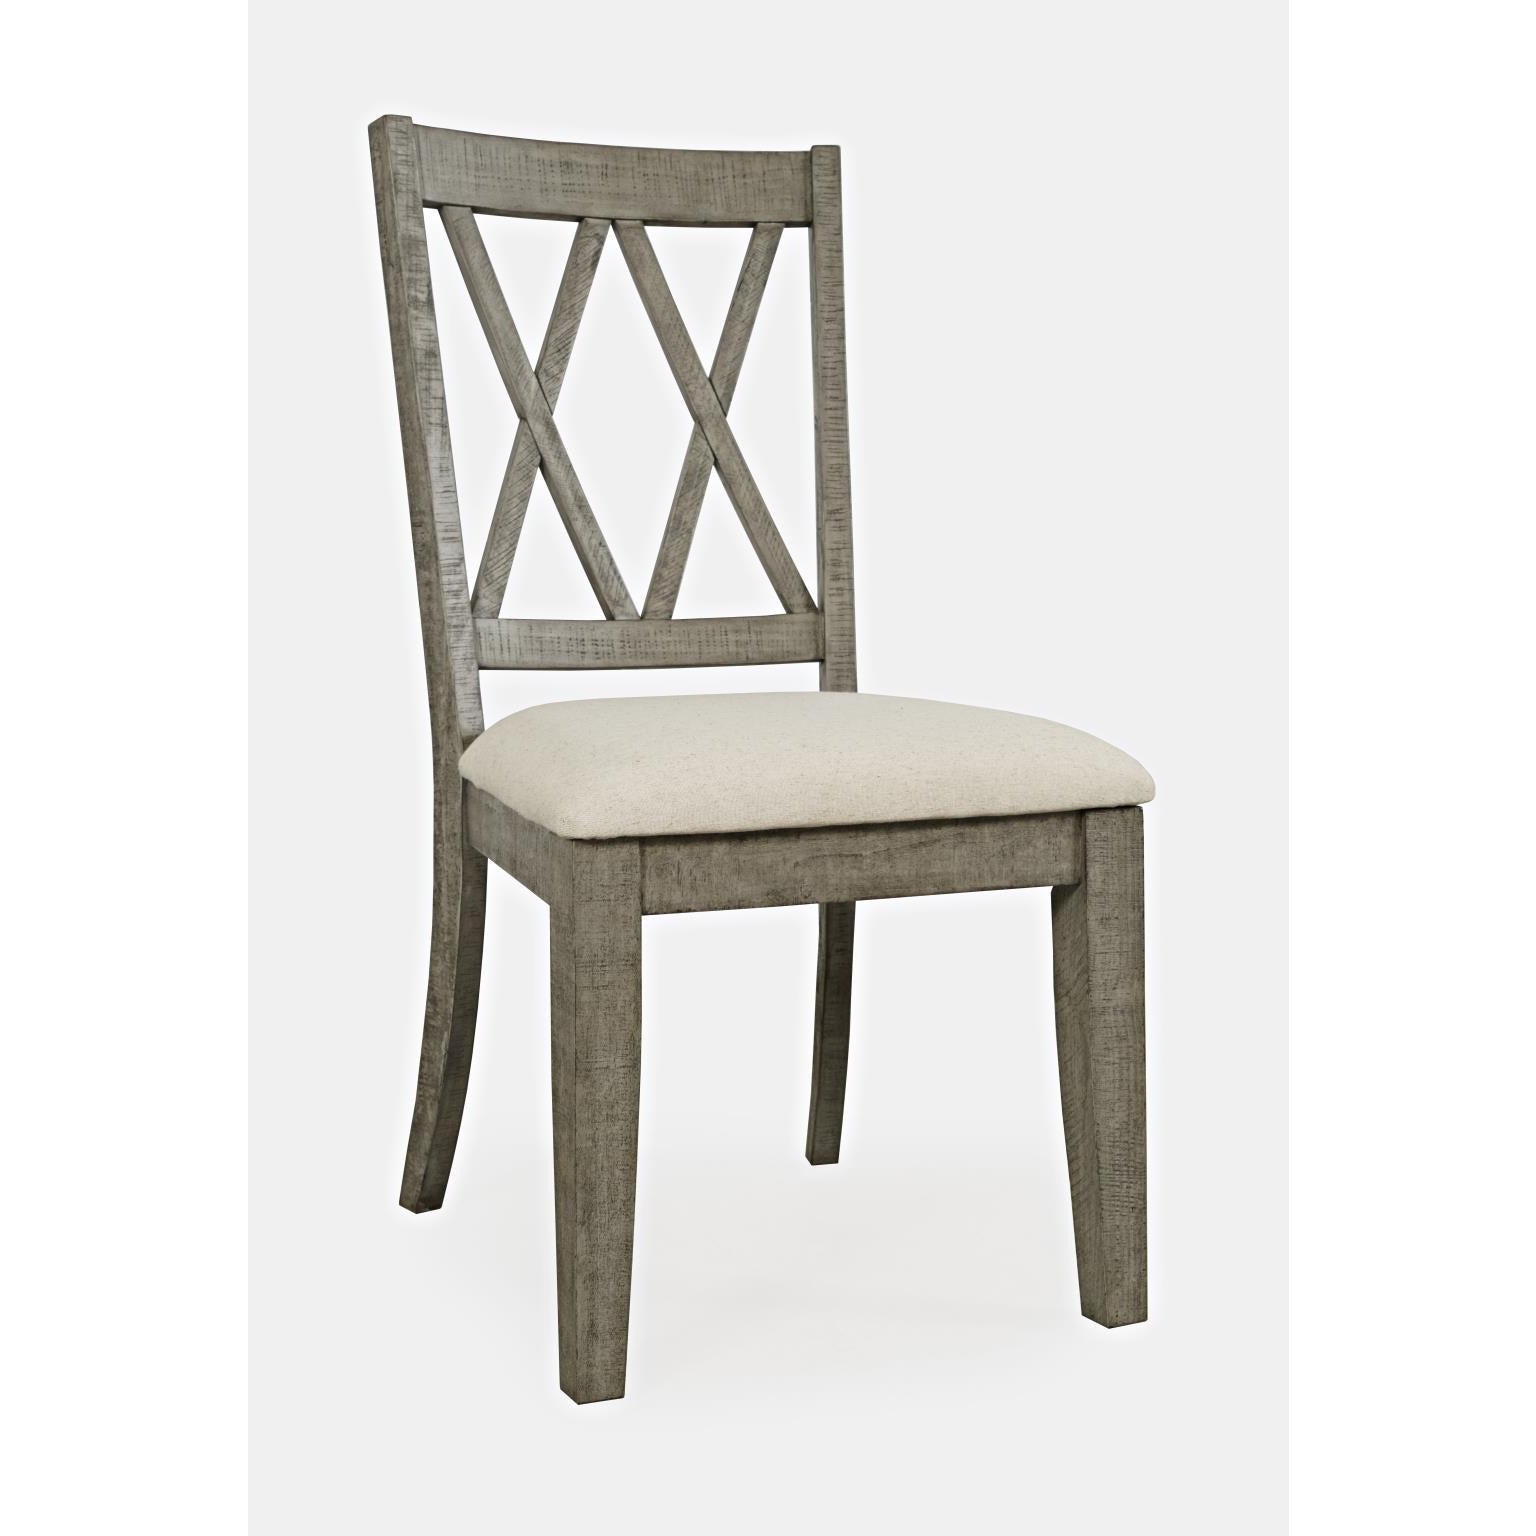 Telluride Driftwood X Back Dining Chair